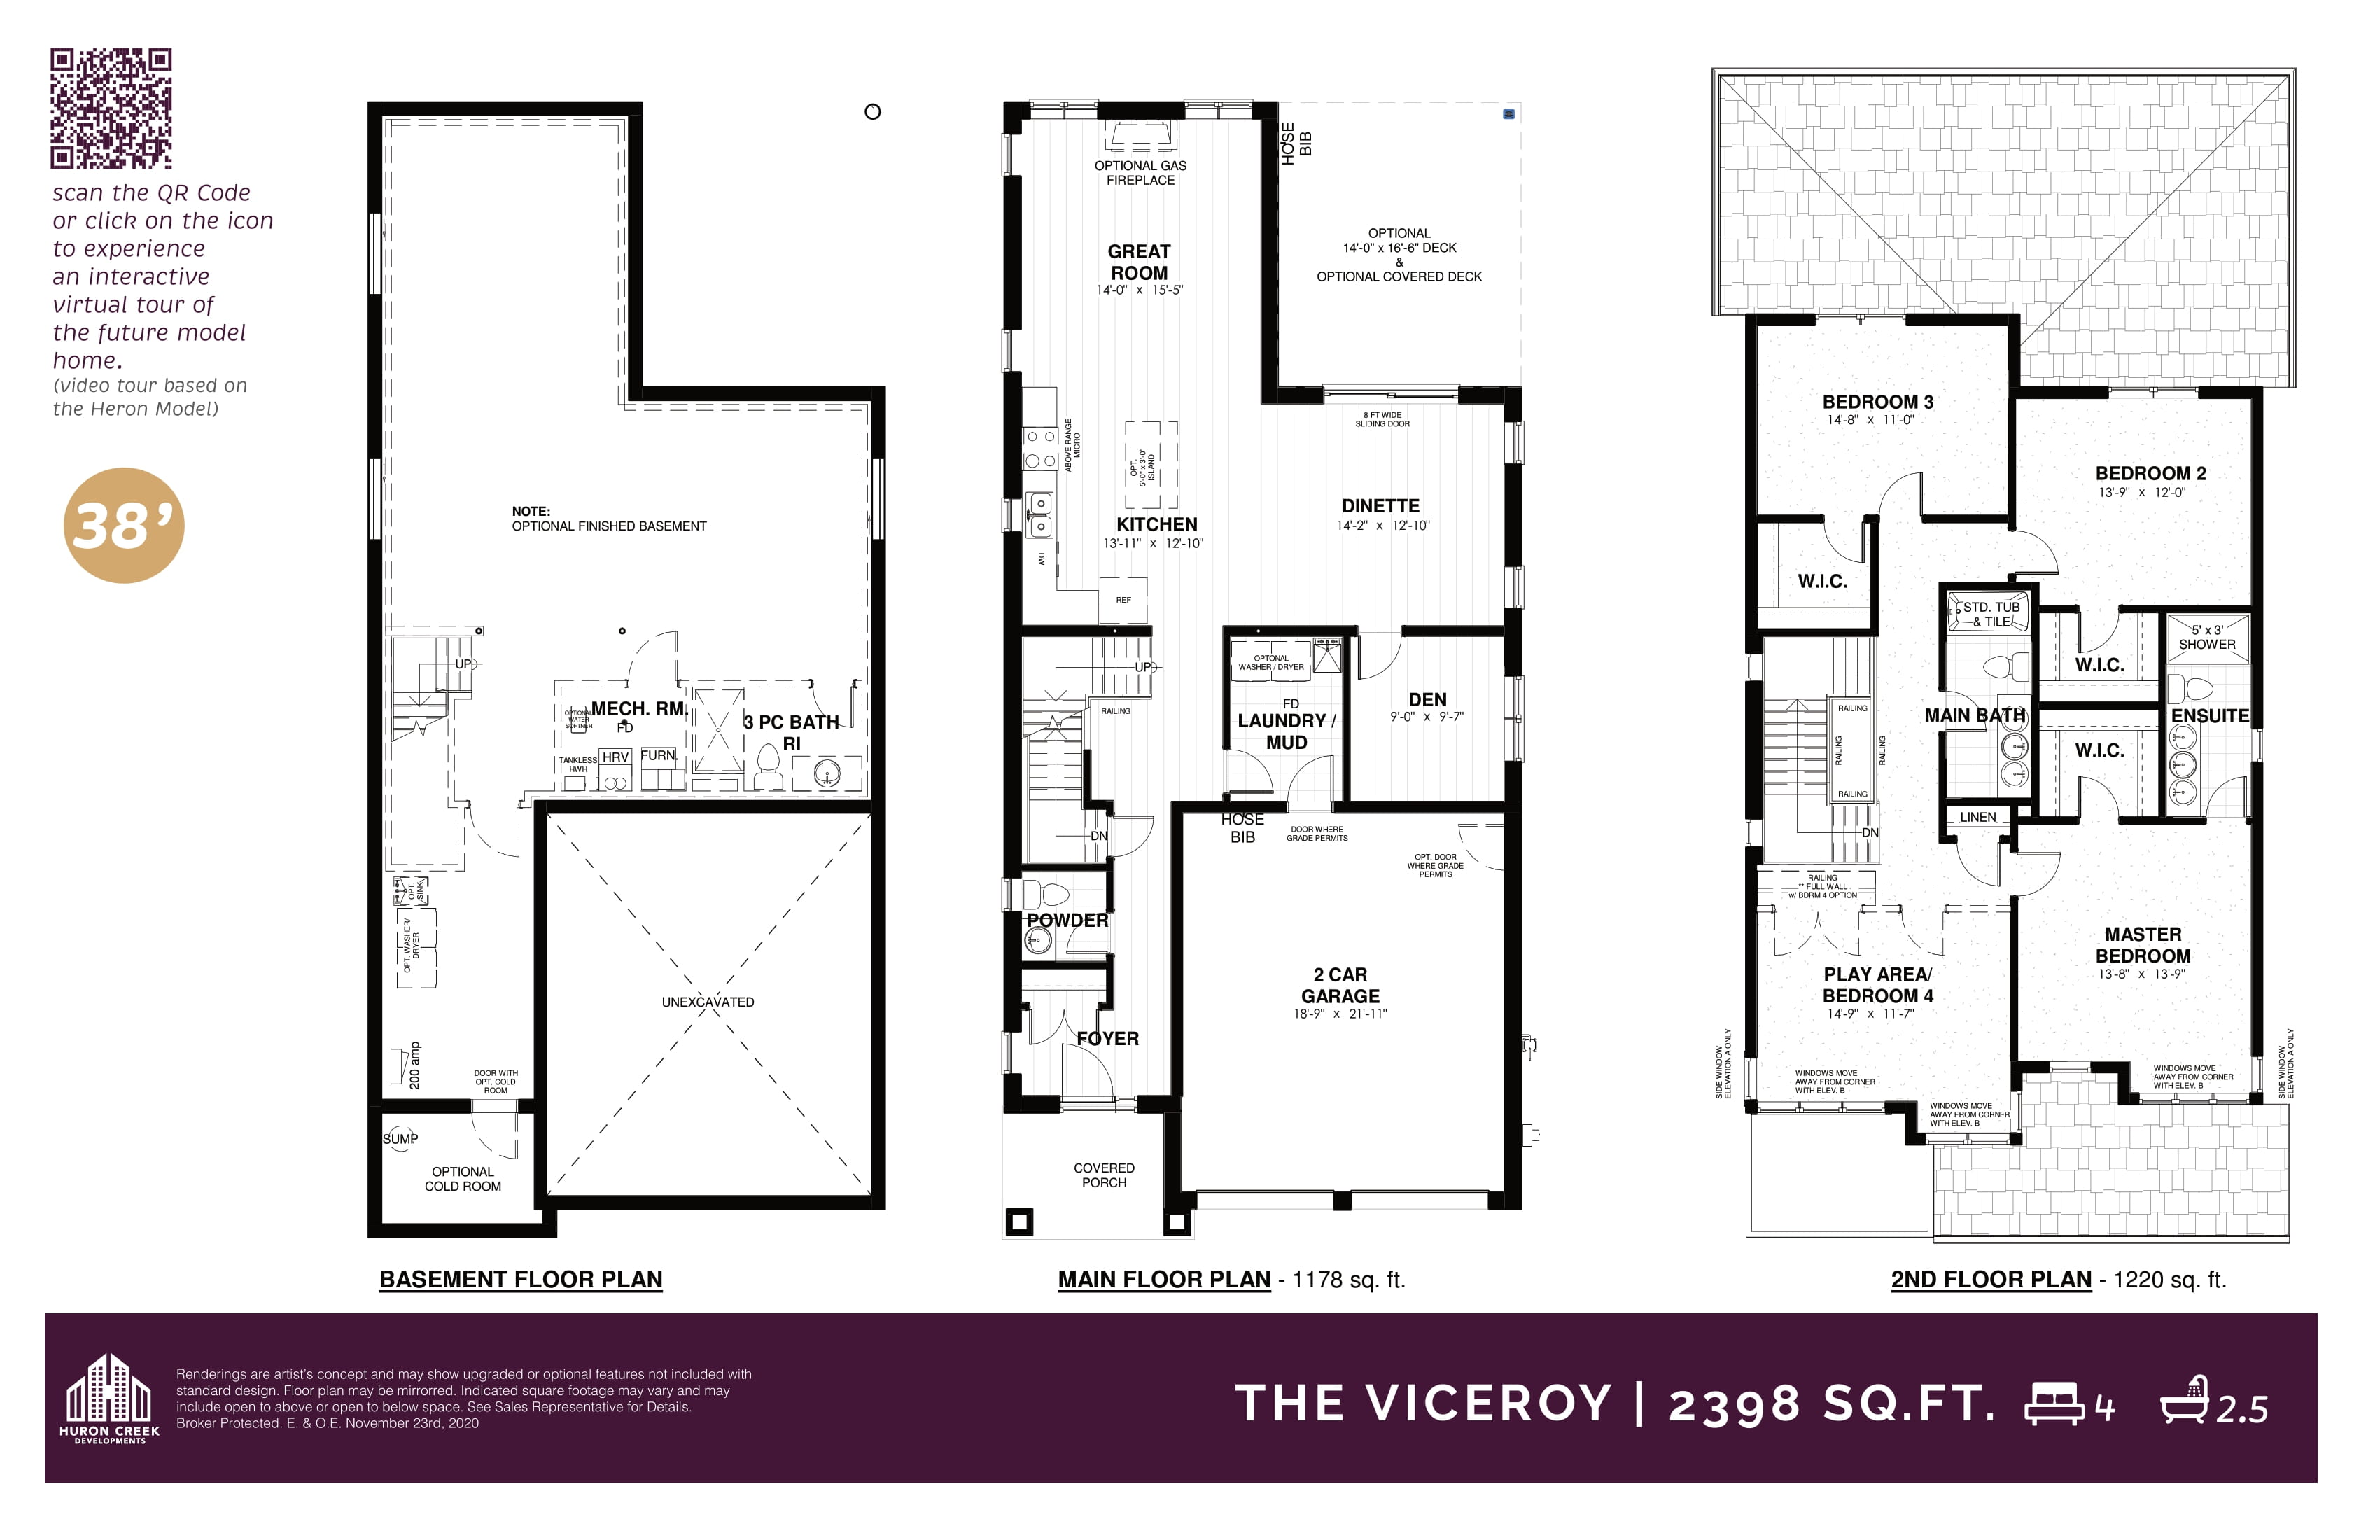  Floor Plan of Westwood Village PRESERVE with undefined beds